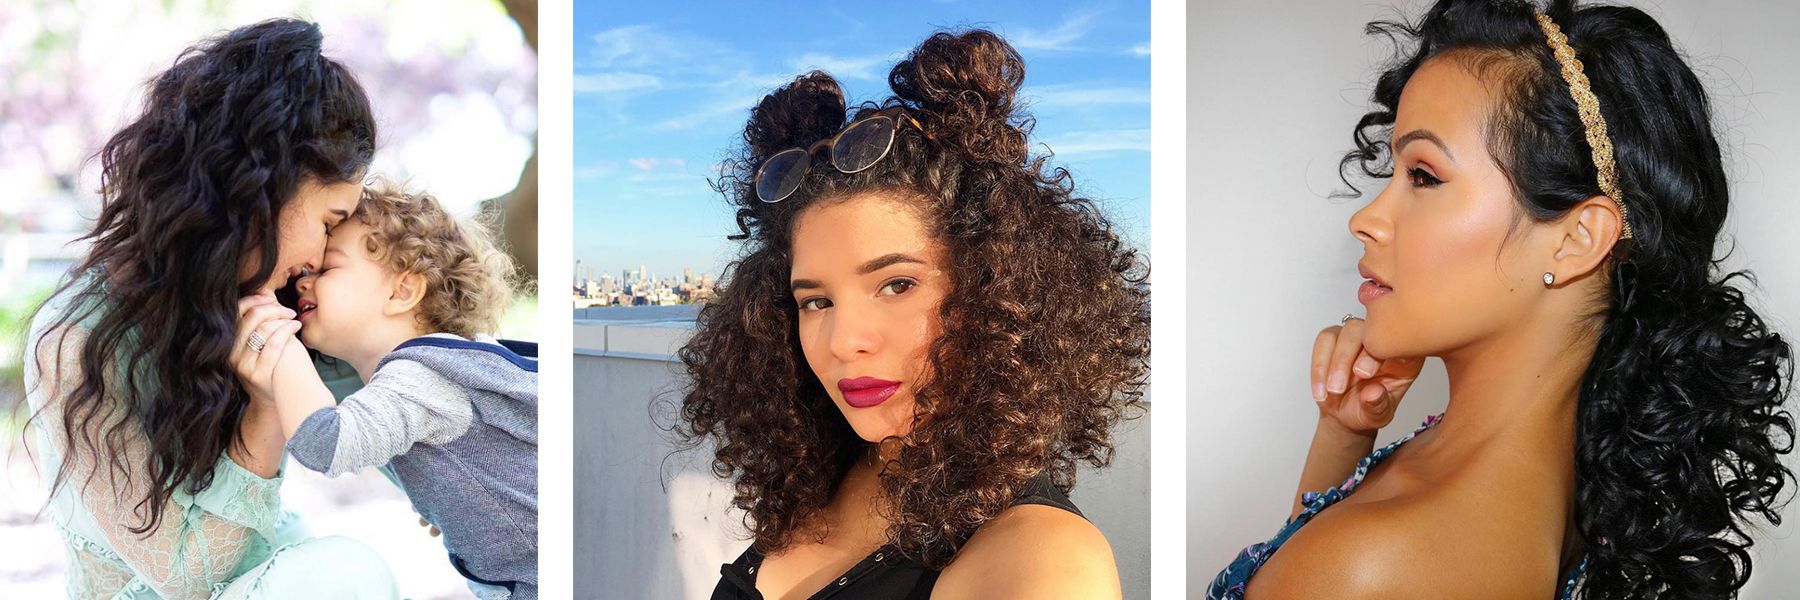 Well Known Side Hairstyles With Puff And Curls Throughout Curly Hairstyles: 3 Hairstyles For Curly Hair (View 11 of 20)